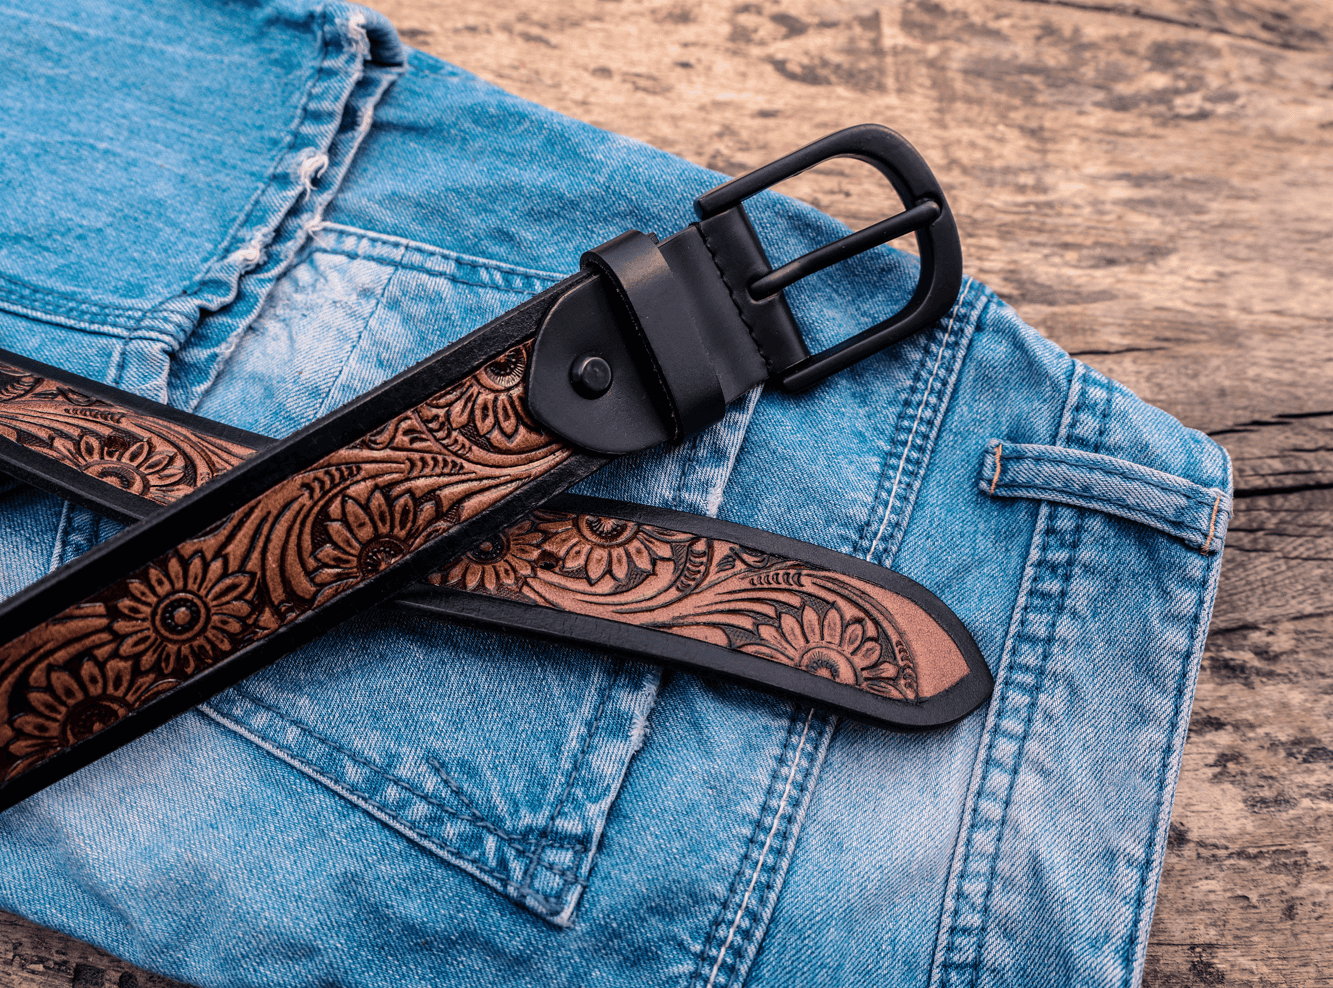 Exquisite Hand-Carved Leather Belt with Black Buckle, Crafted in India - CELTICINDIA